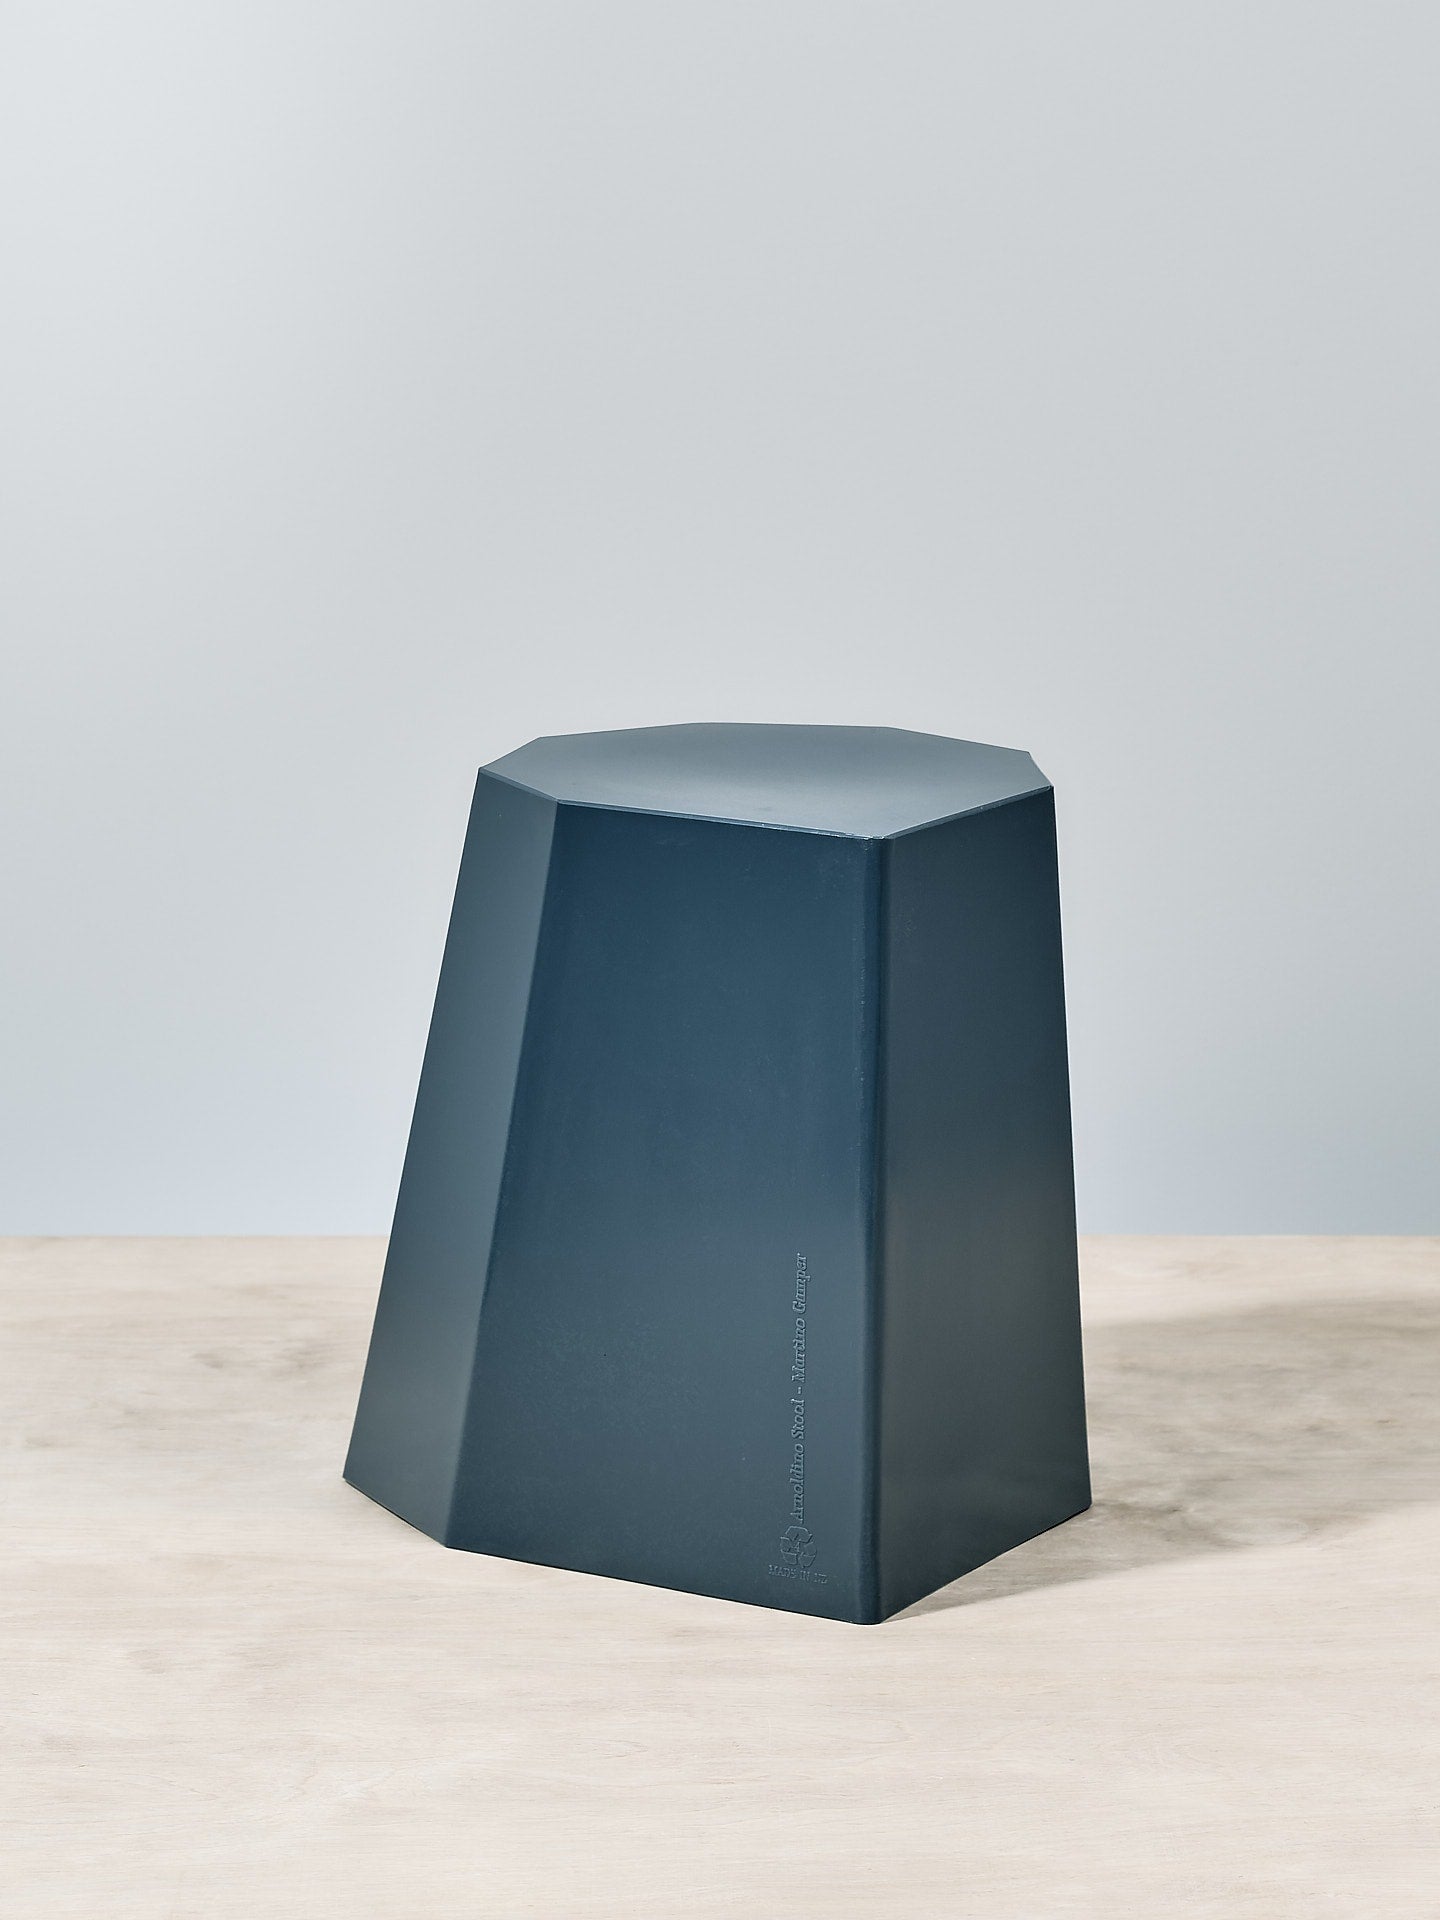 An Arnoldino Stool – Navy sitting on top of a wooden table, Martino Gamper.